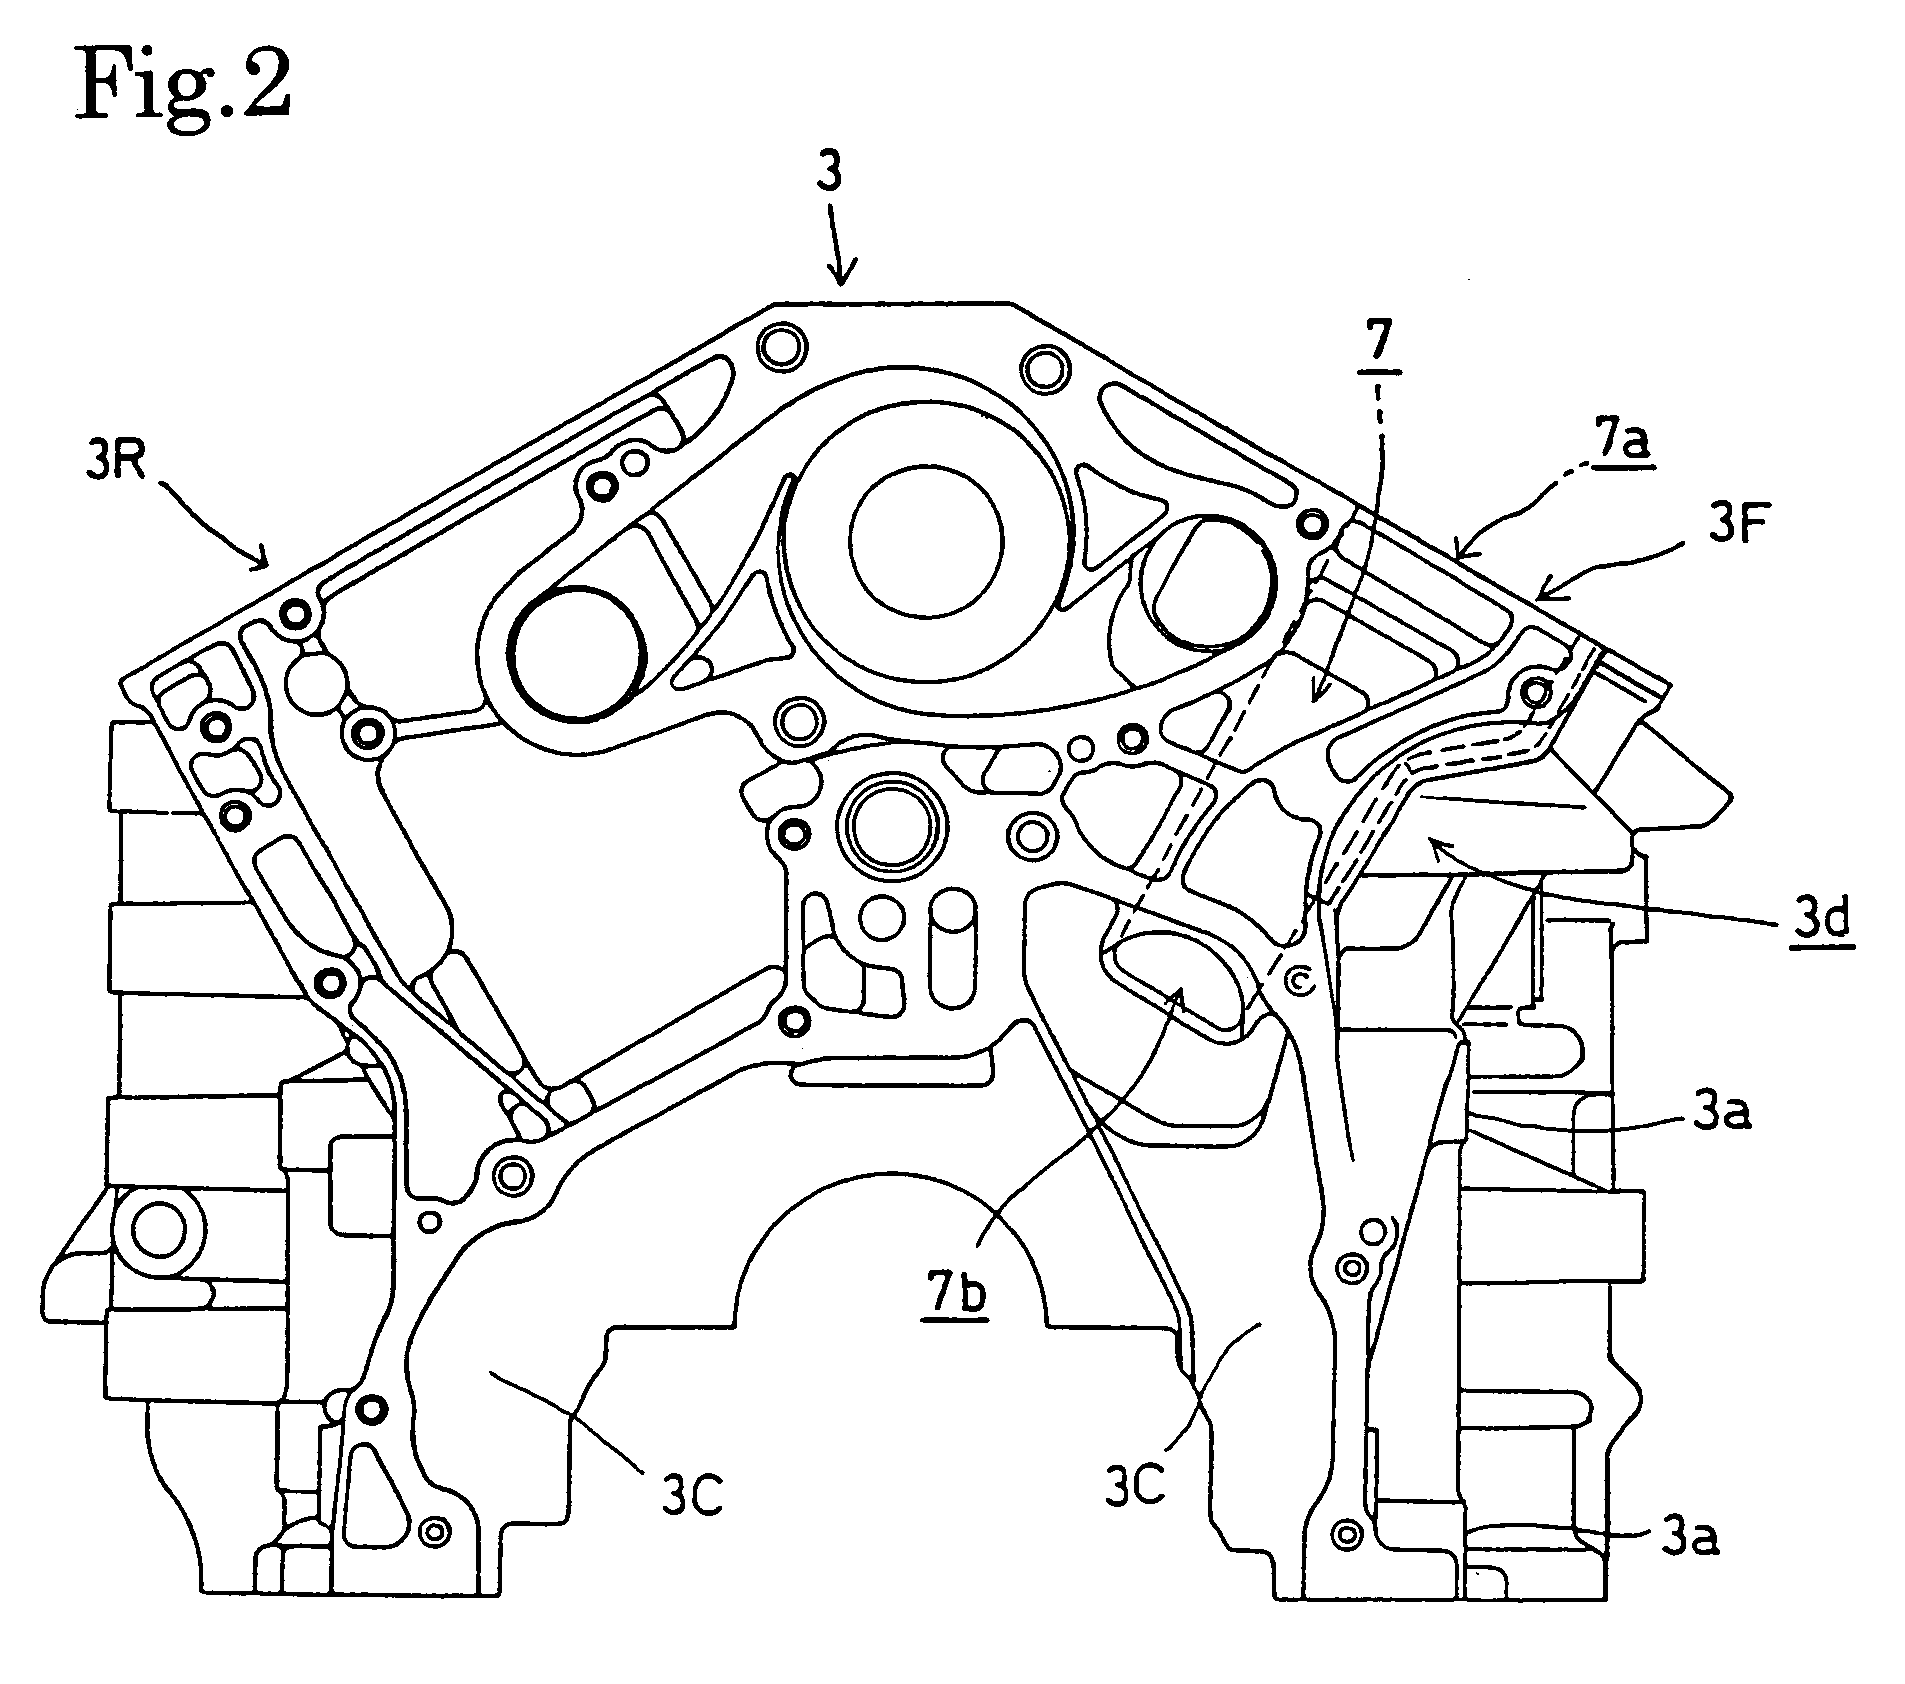 Accessory mounting structure for internal combustion engine